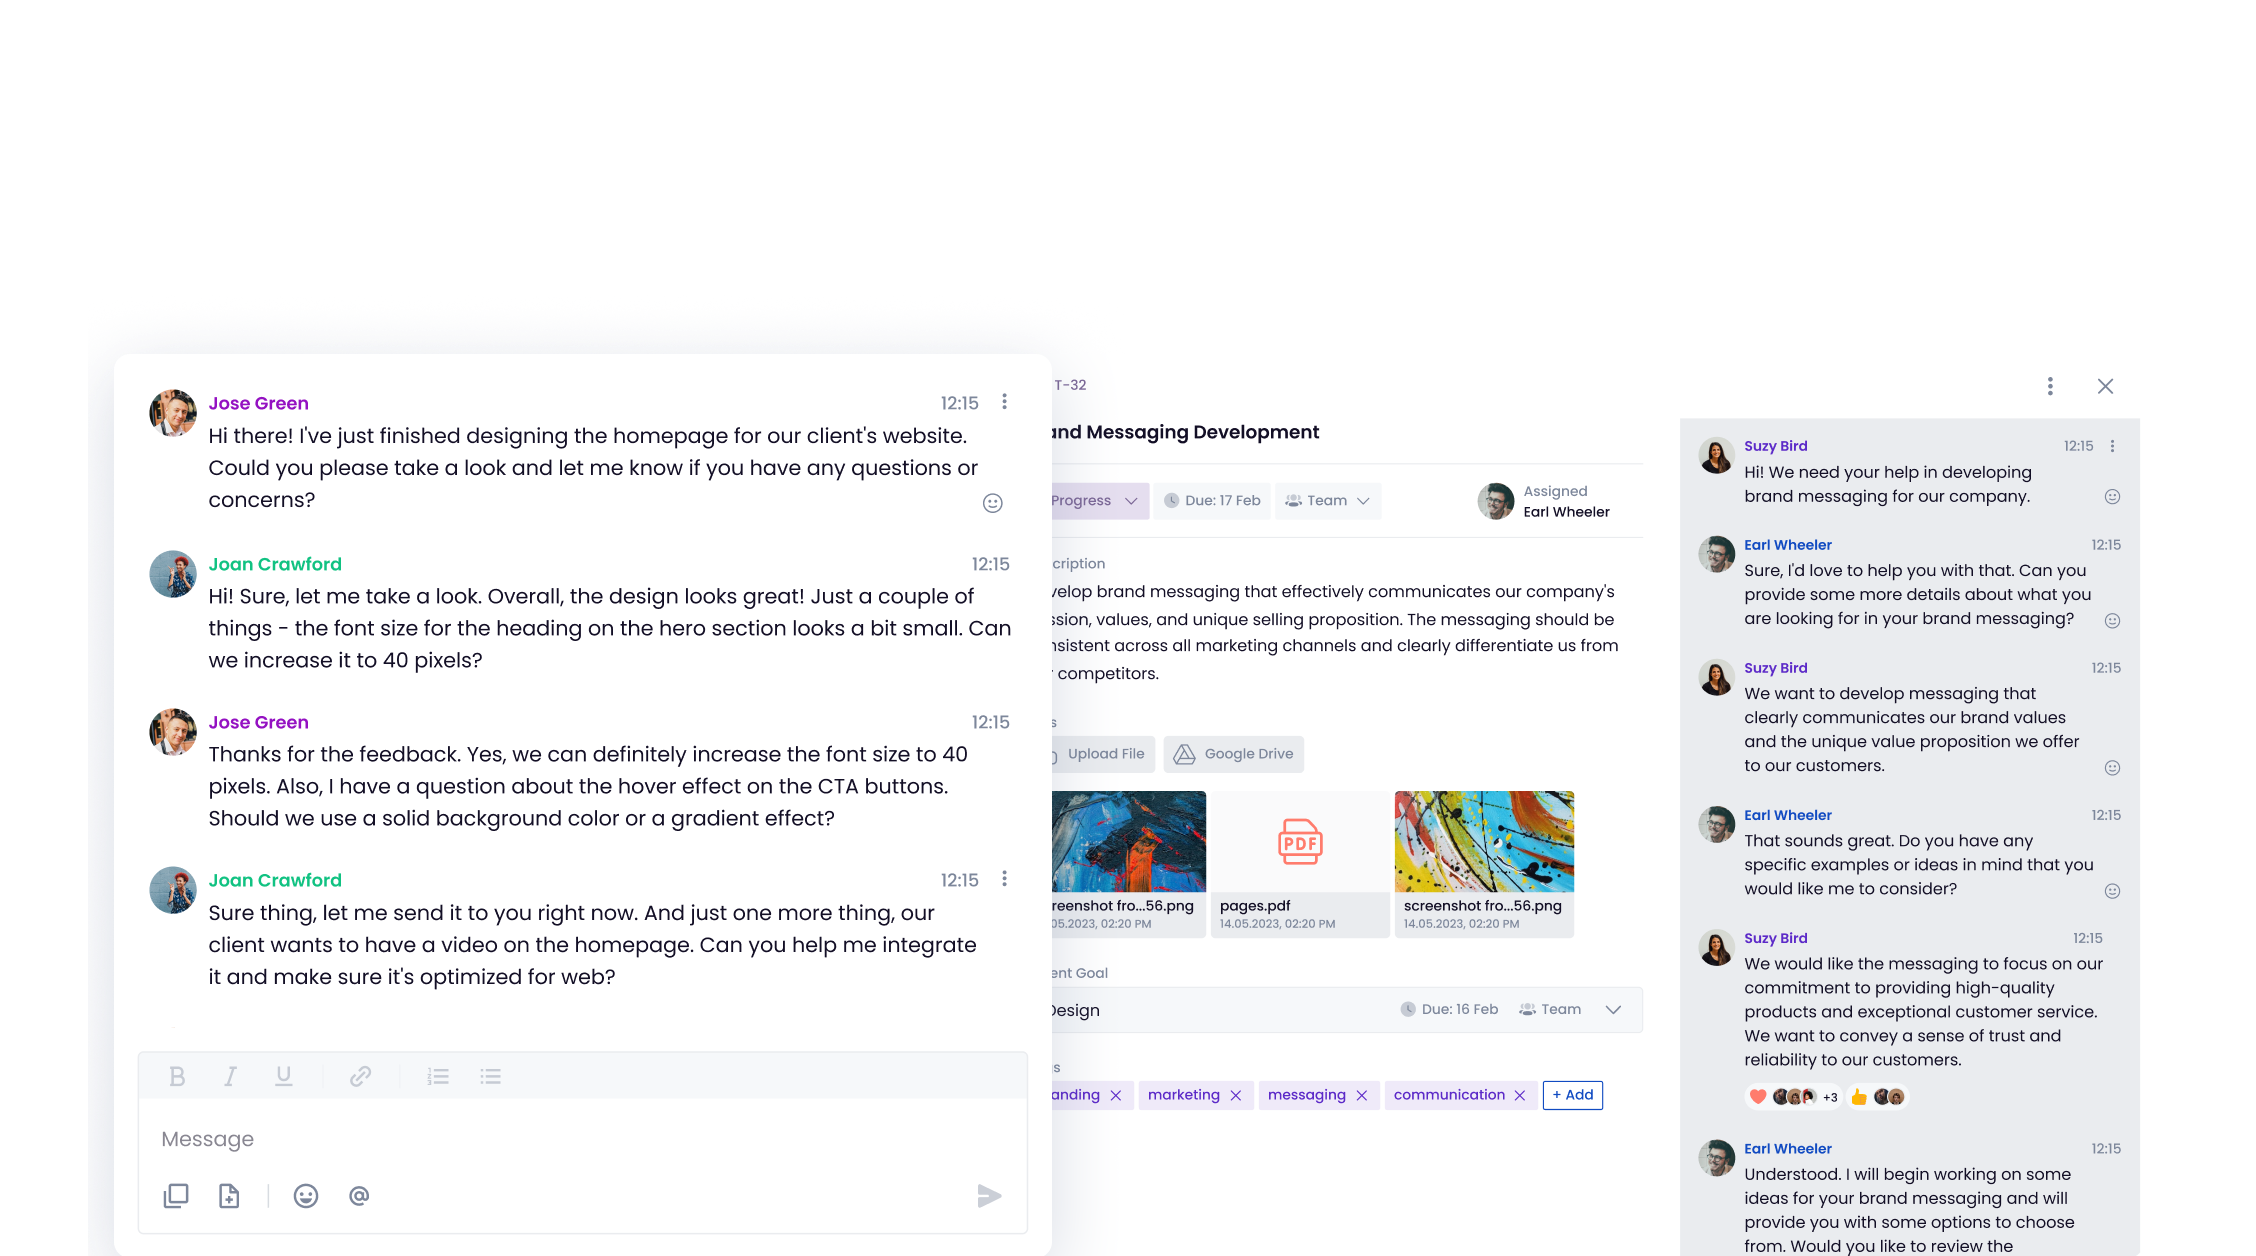 Communicate on live chat and add comments